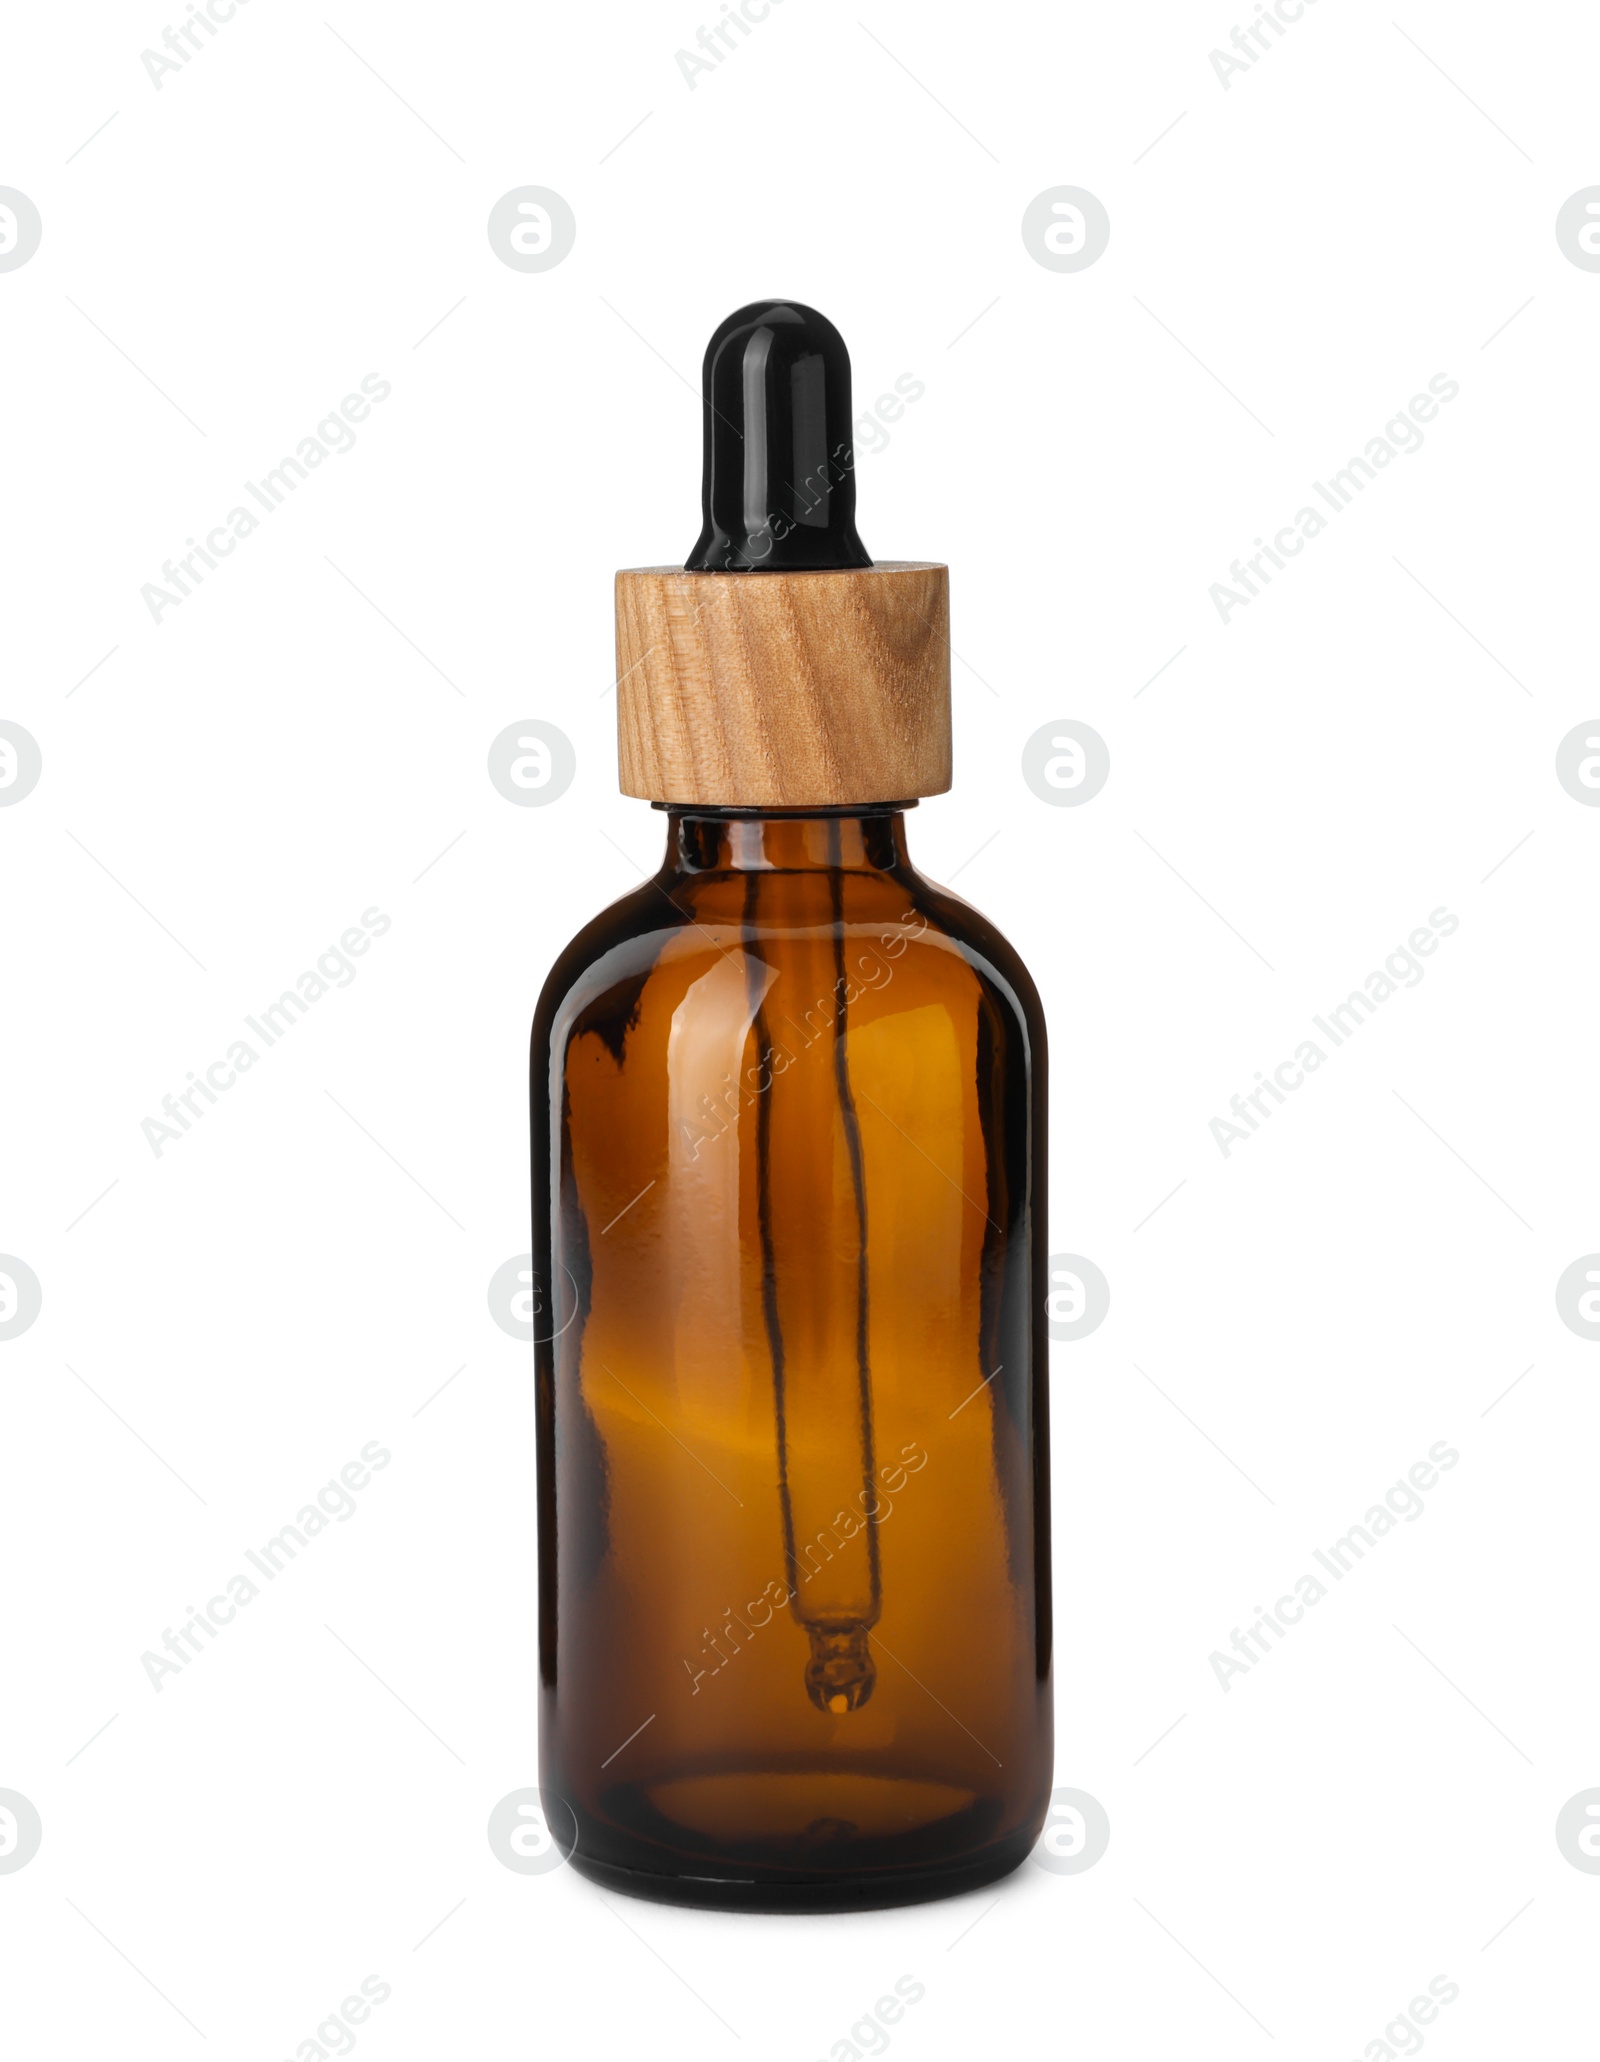 Photo of New empty glass bottle with dropper isolated on white